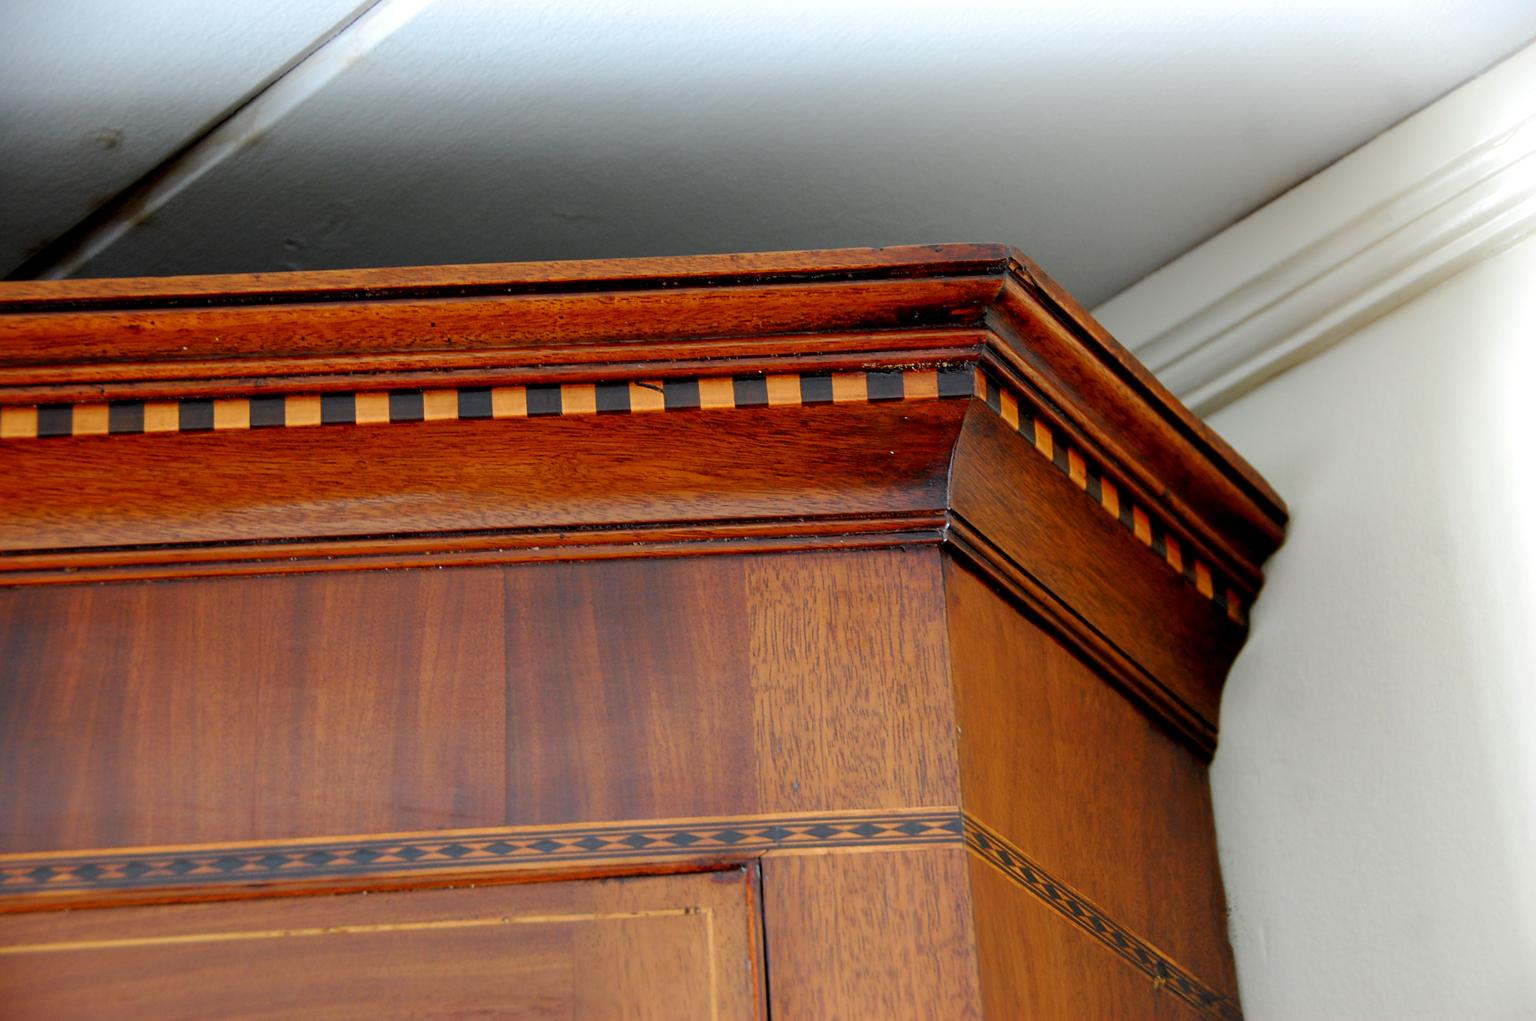 English Georgian period Hepplewhite inlaid mahogany hanging corner cupboard with boxwood stringing to muntins and door. At the cornice there is dentil molding in alternating boxwood and mahogany, as well as more elaborate stringing on the frieze,